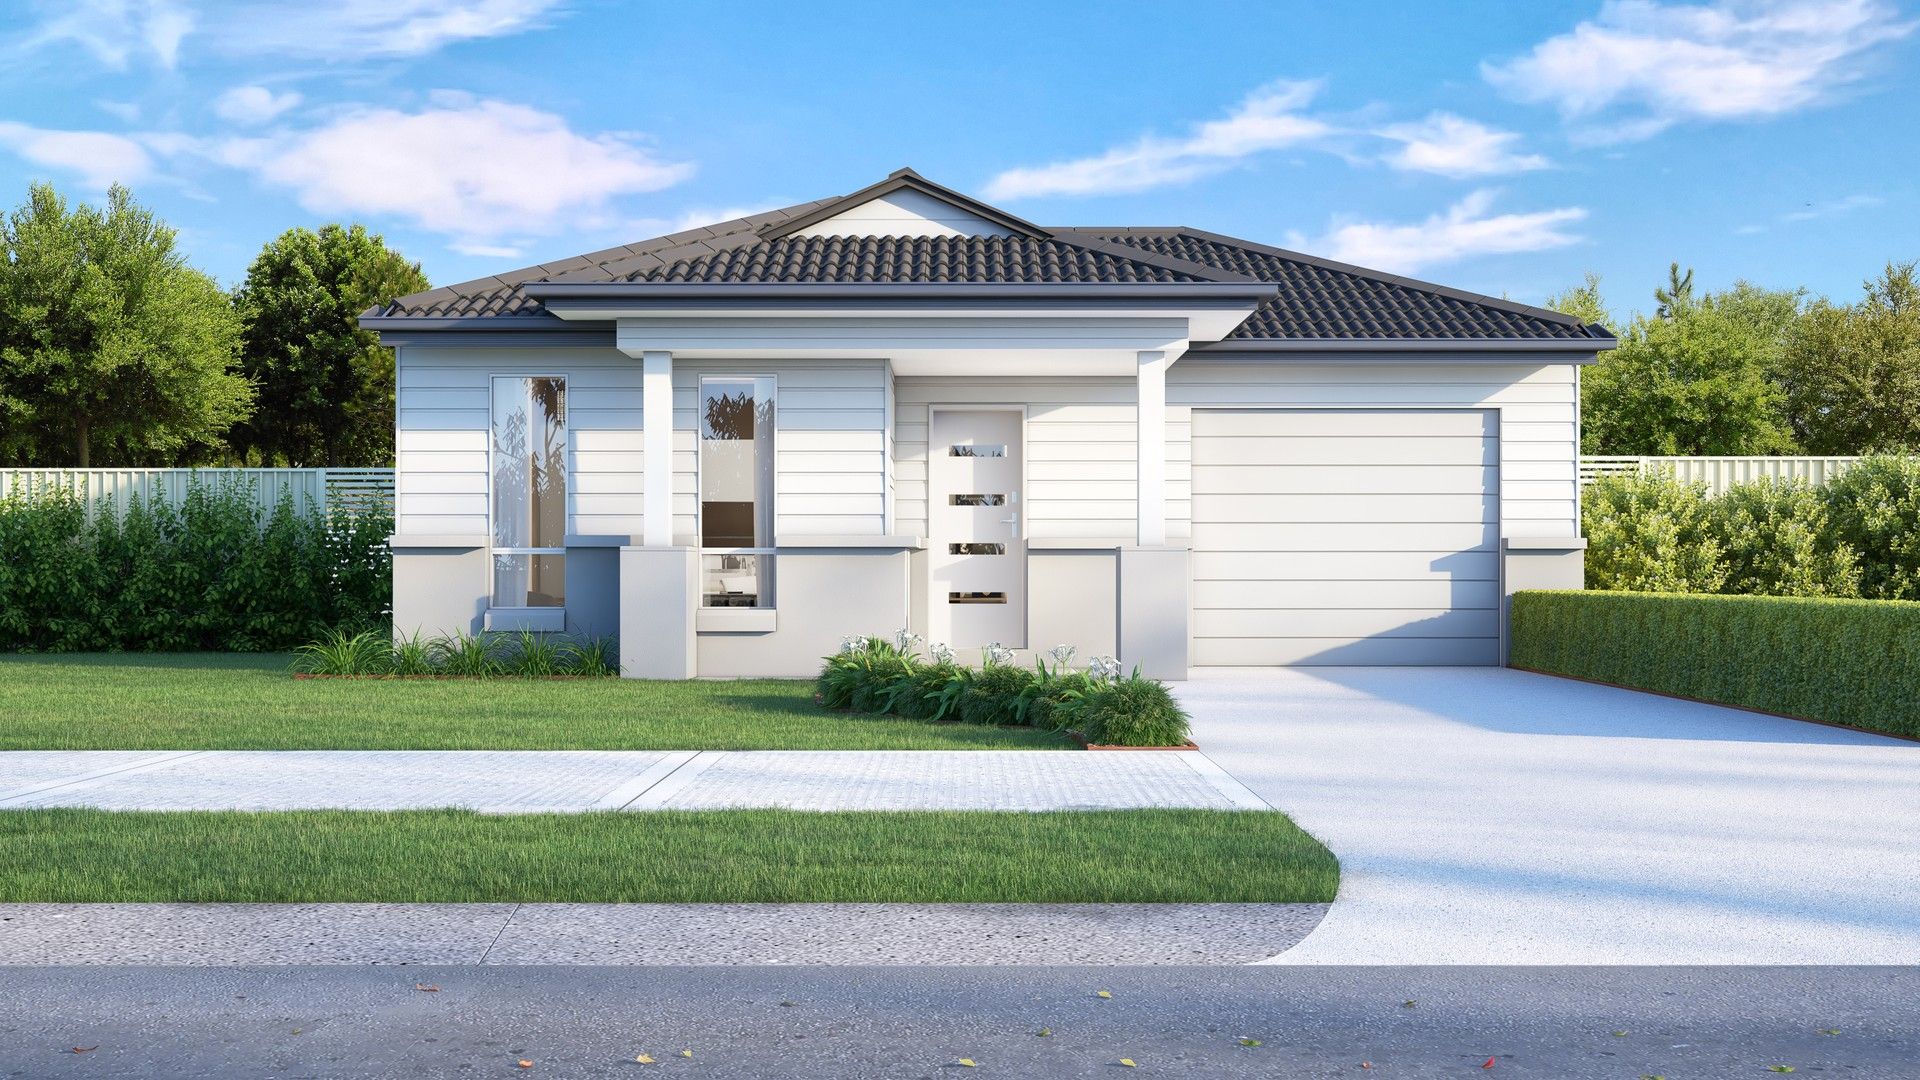 4 bedrooms New House & Land in 2115 Road A CLYDE NORTH VIC, 3978